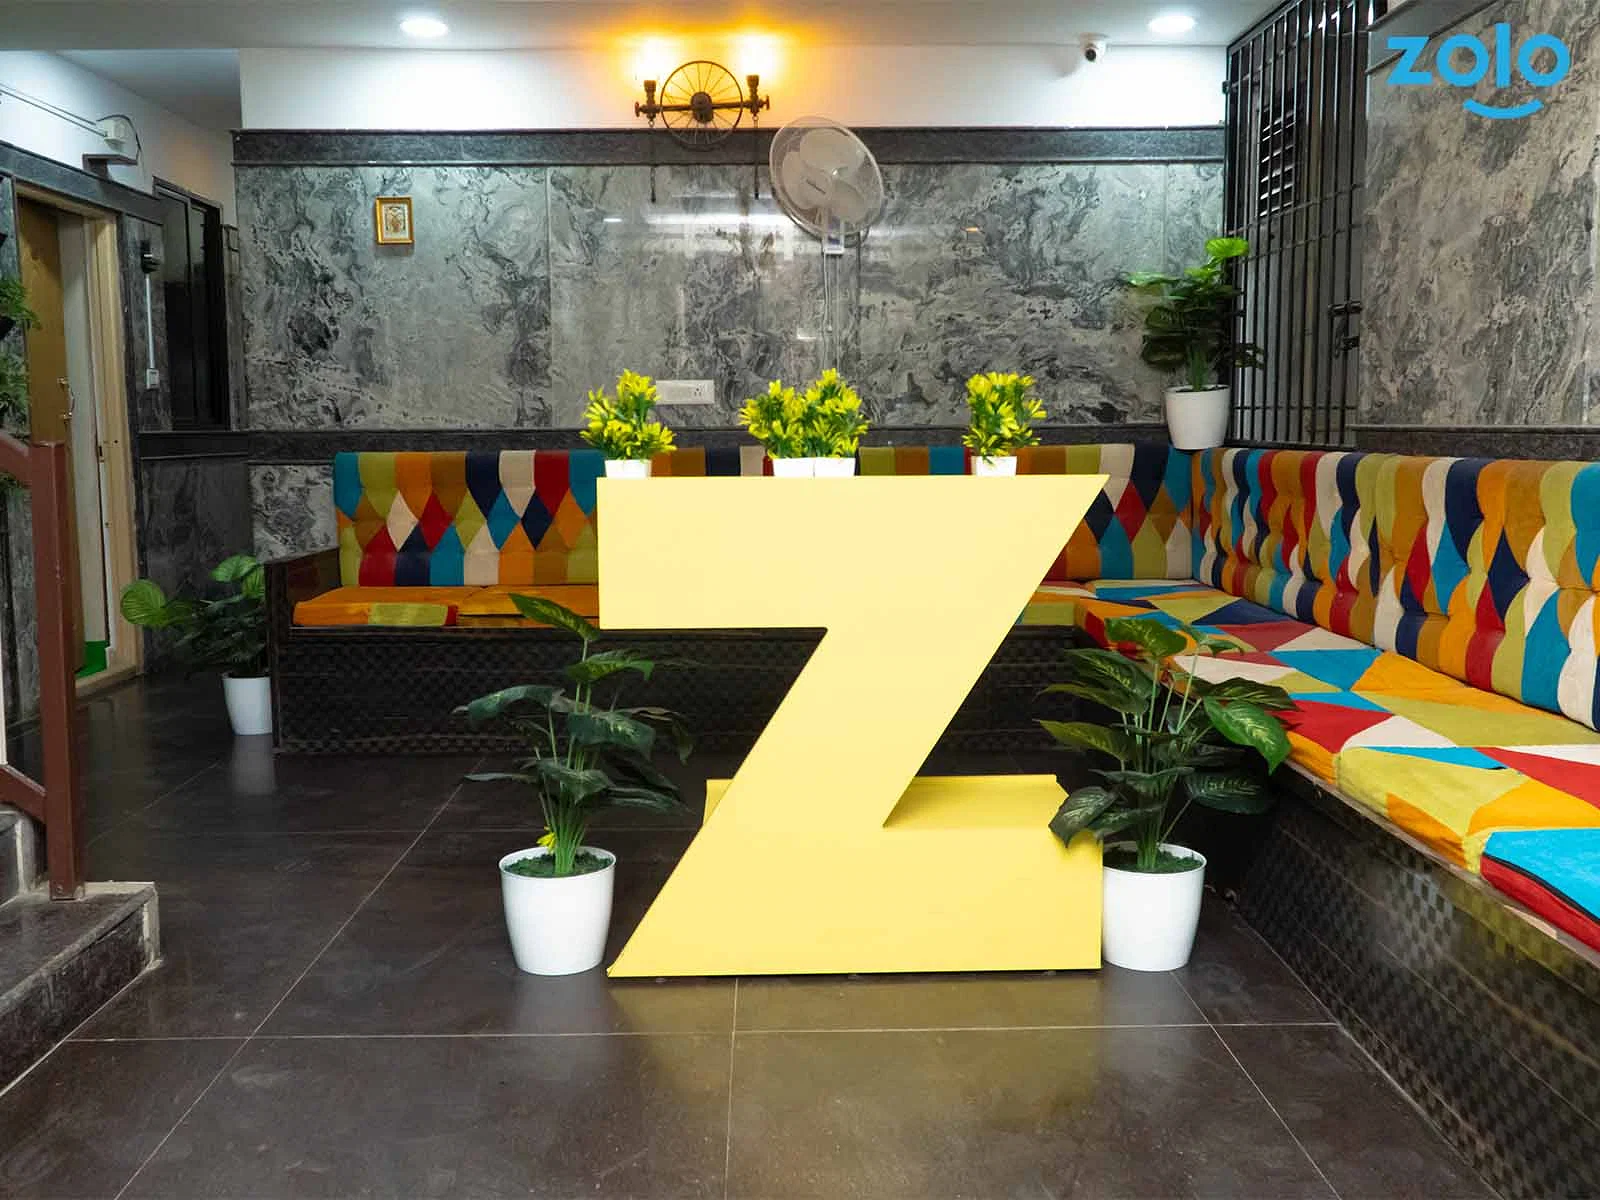 safe and affordable hostels for unisex students with 24/7 security and CCTV surveillance-Zolo Highstreet E